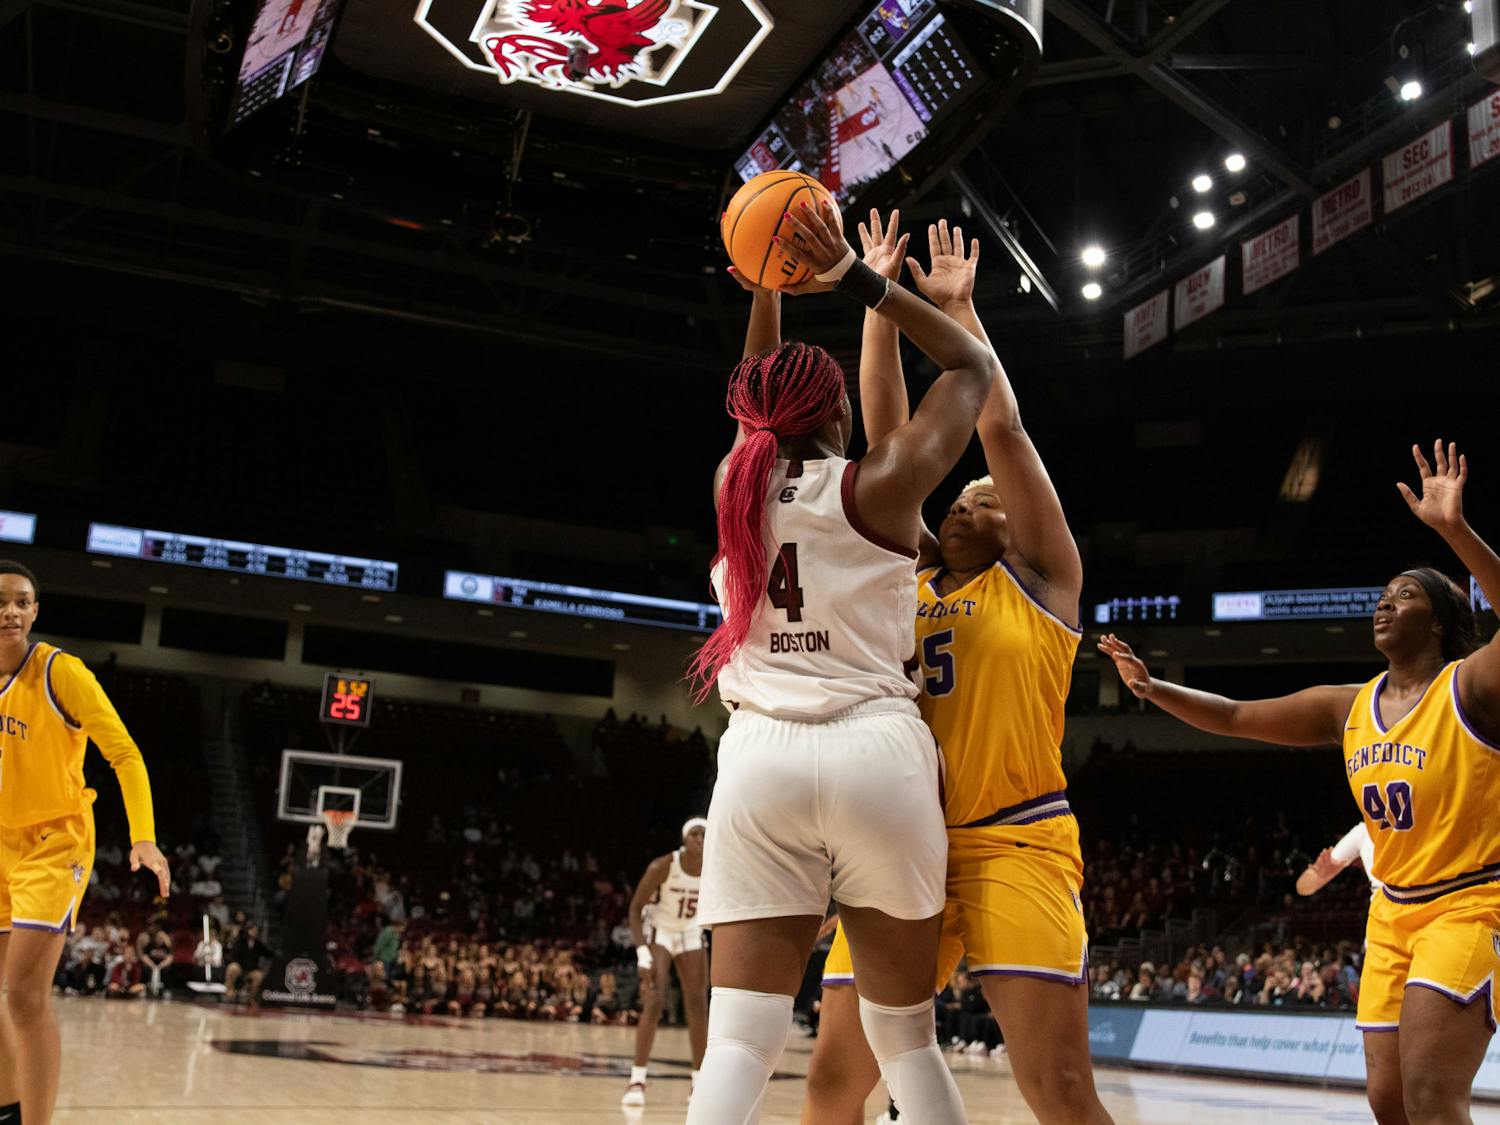 Senior forward Aliyah Boston holds the ball above her head and away from a Benedict College player during the exhibition game at Colonial Life Arena on Oct. 31, 2022. Boston was recently unanimously named to the AP Preseason All-American team.&nbsp;